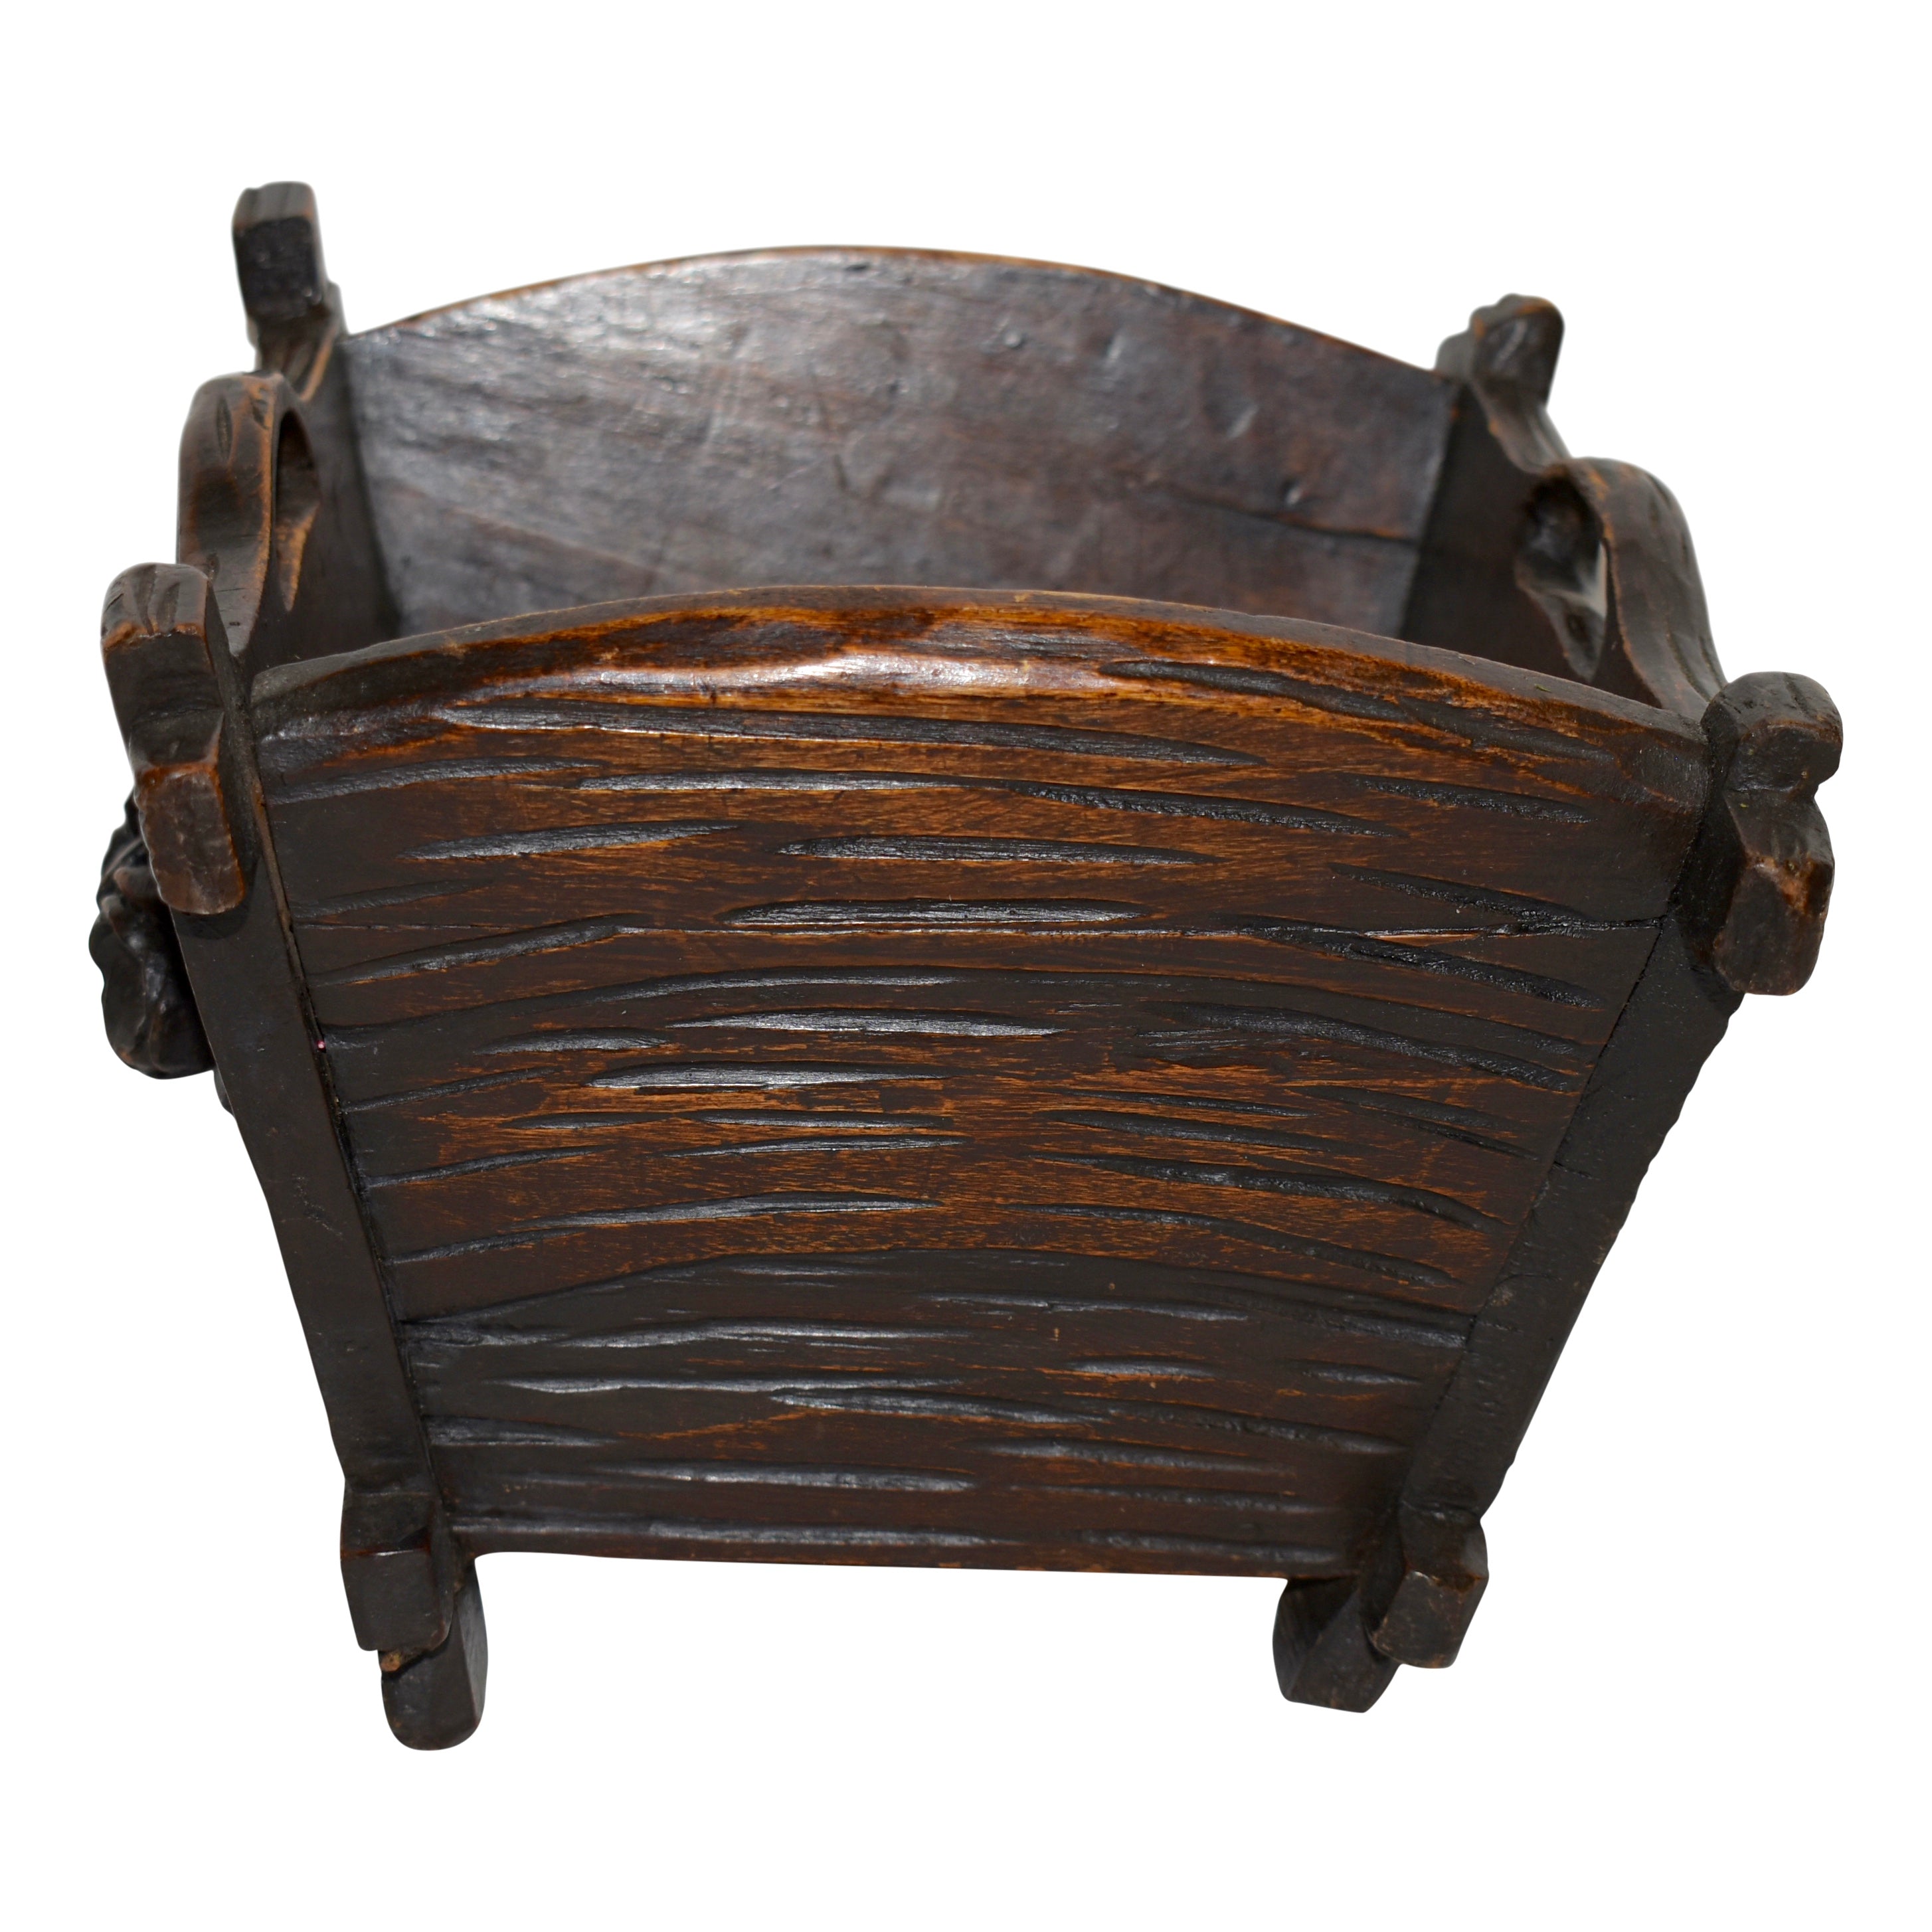 Carved Wooden Bucket